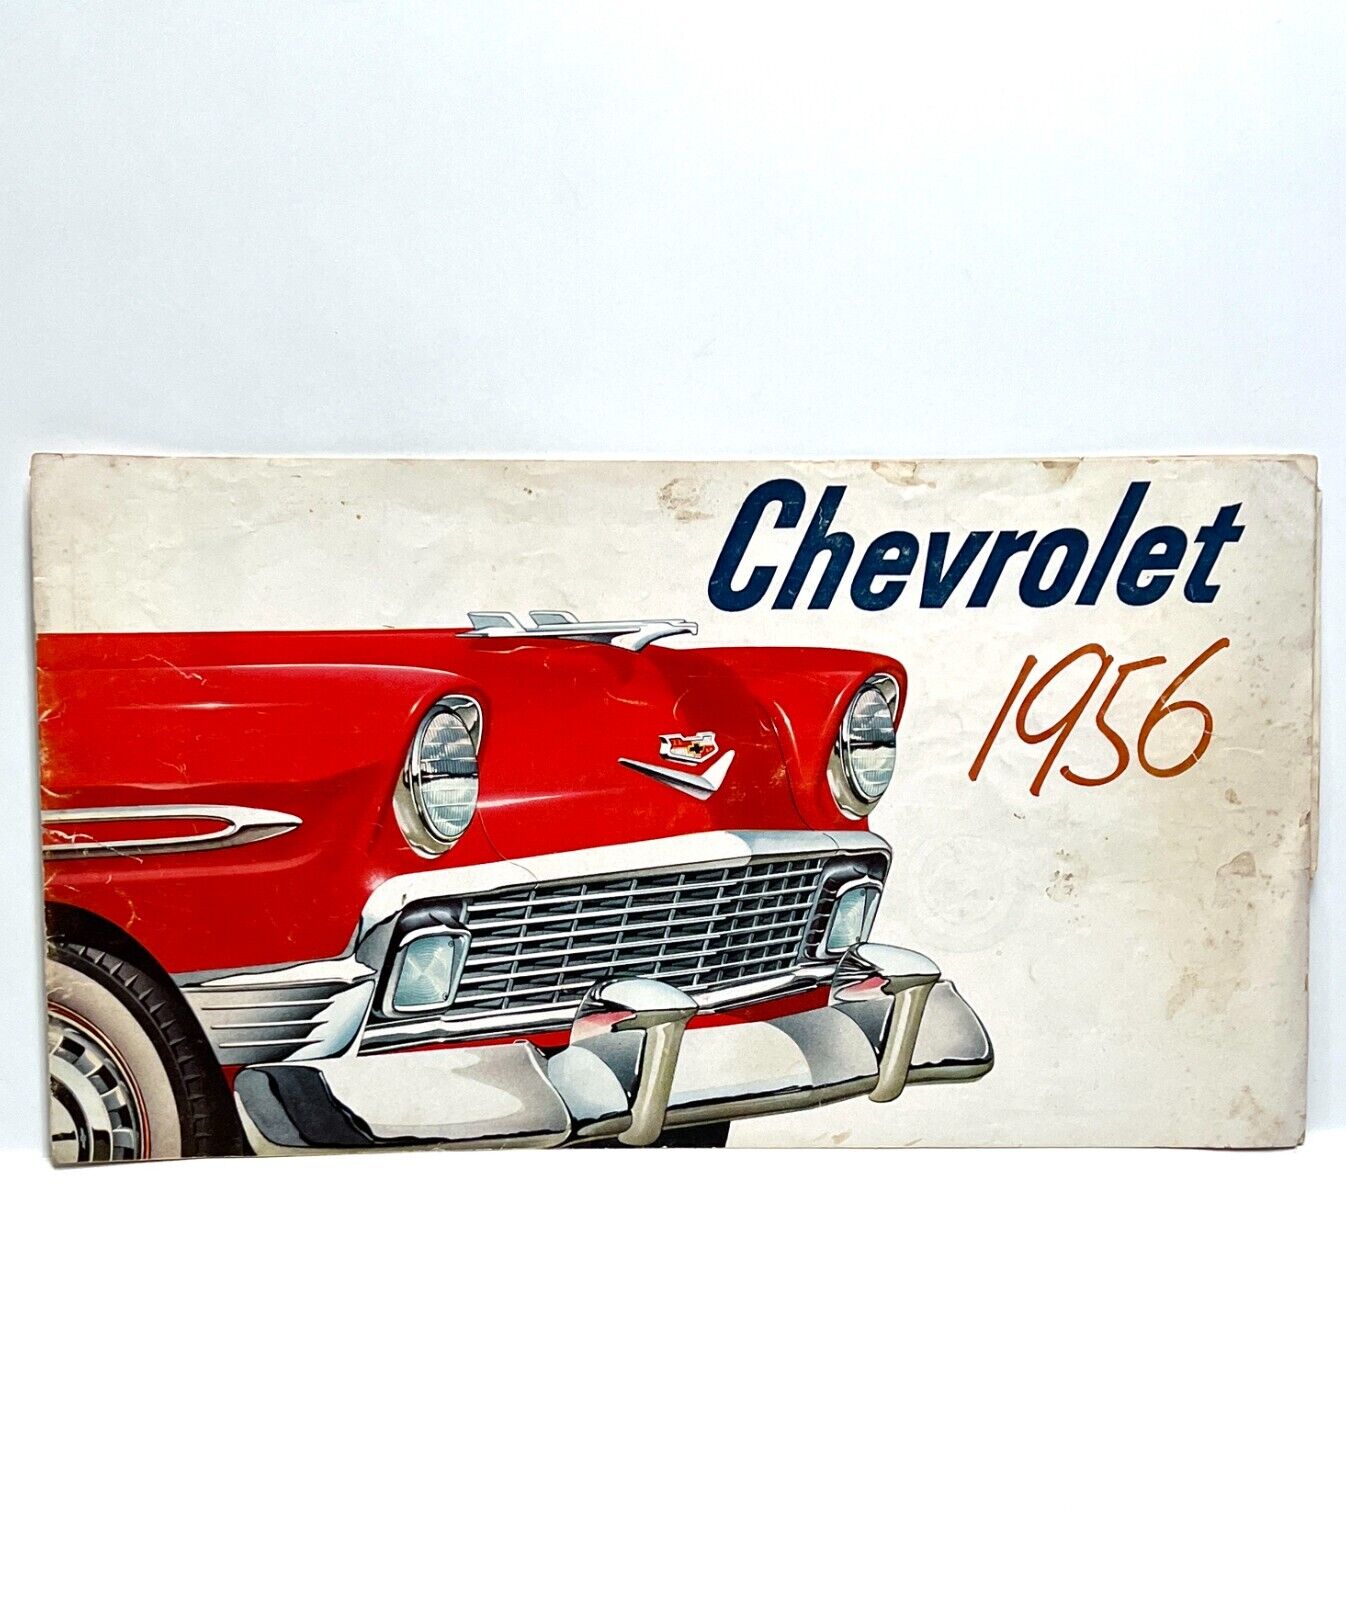 Vintage 1956 Chevrolet Chevy Automotive Advertising Sales Fold Out Brochure